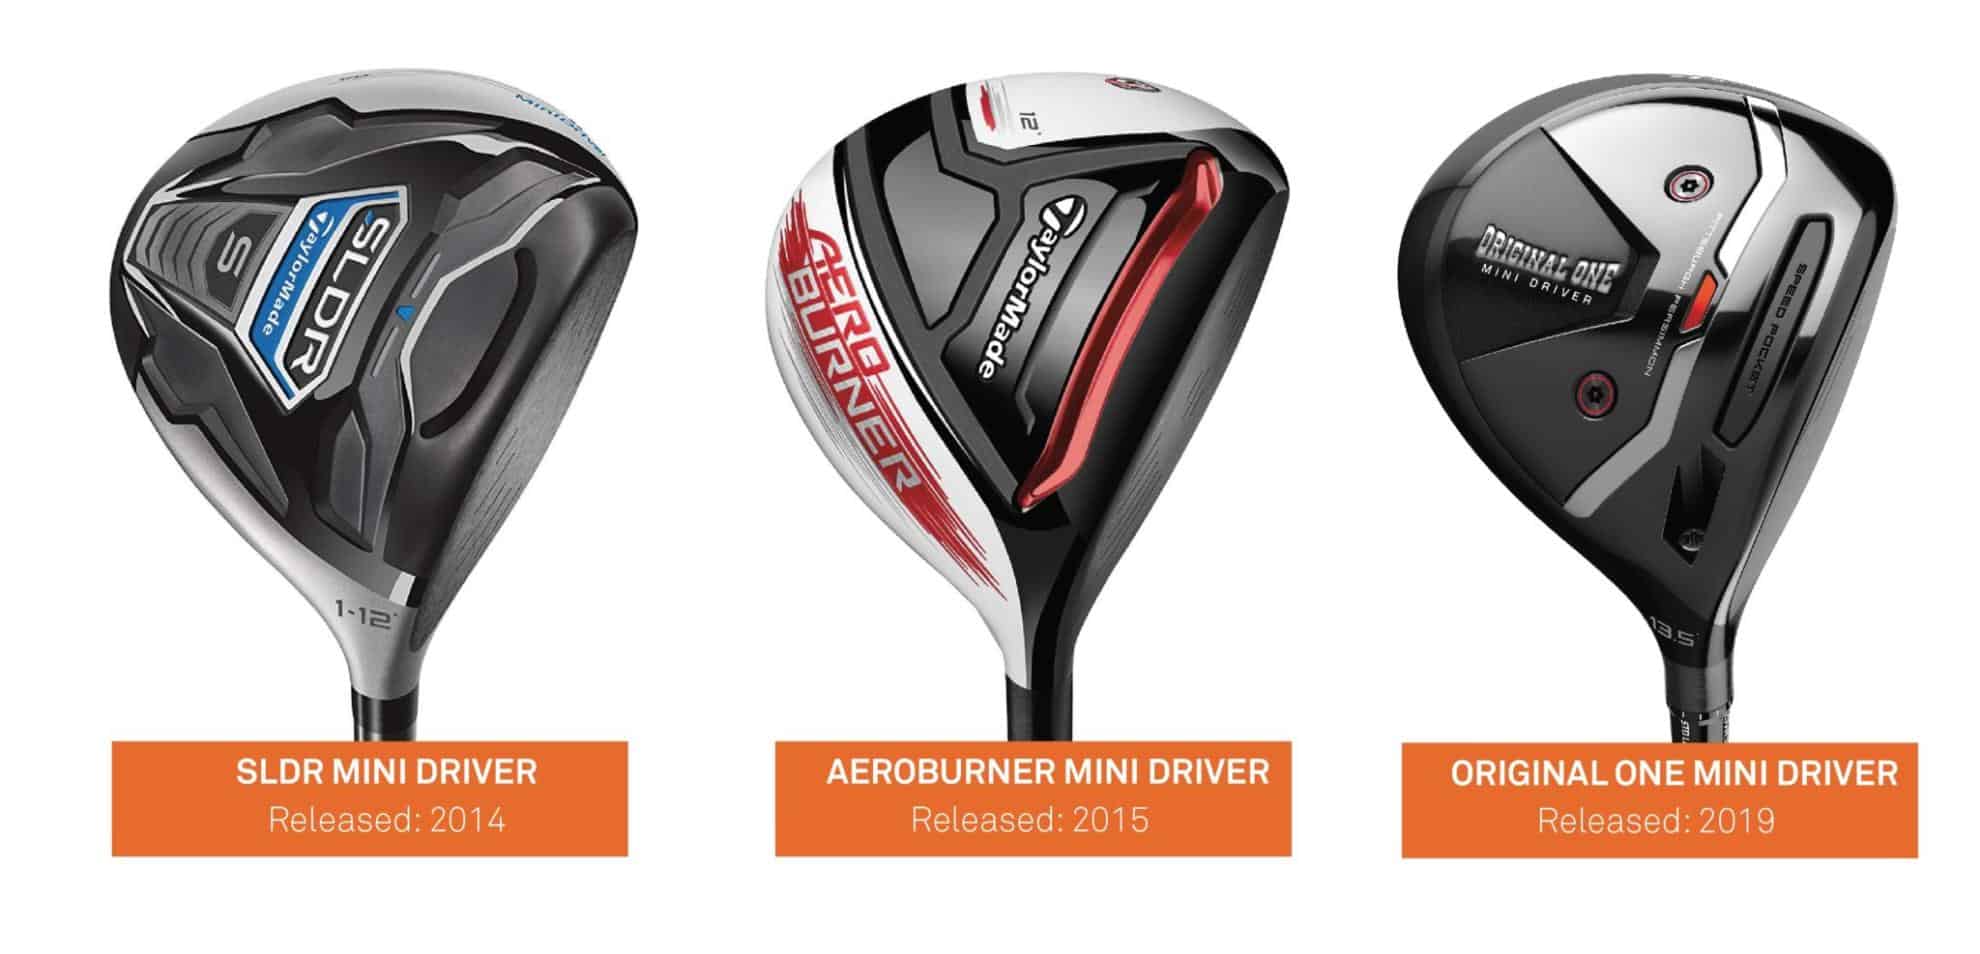 The evolution of the TaylorMade Mini Driver